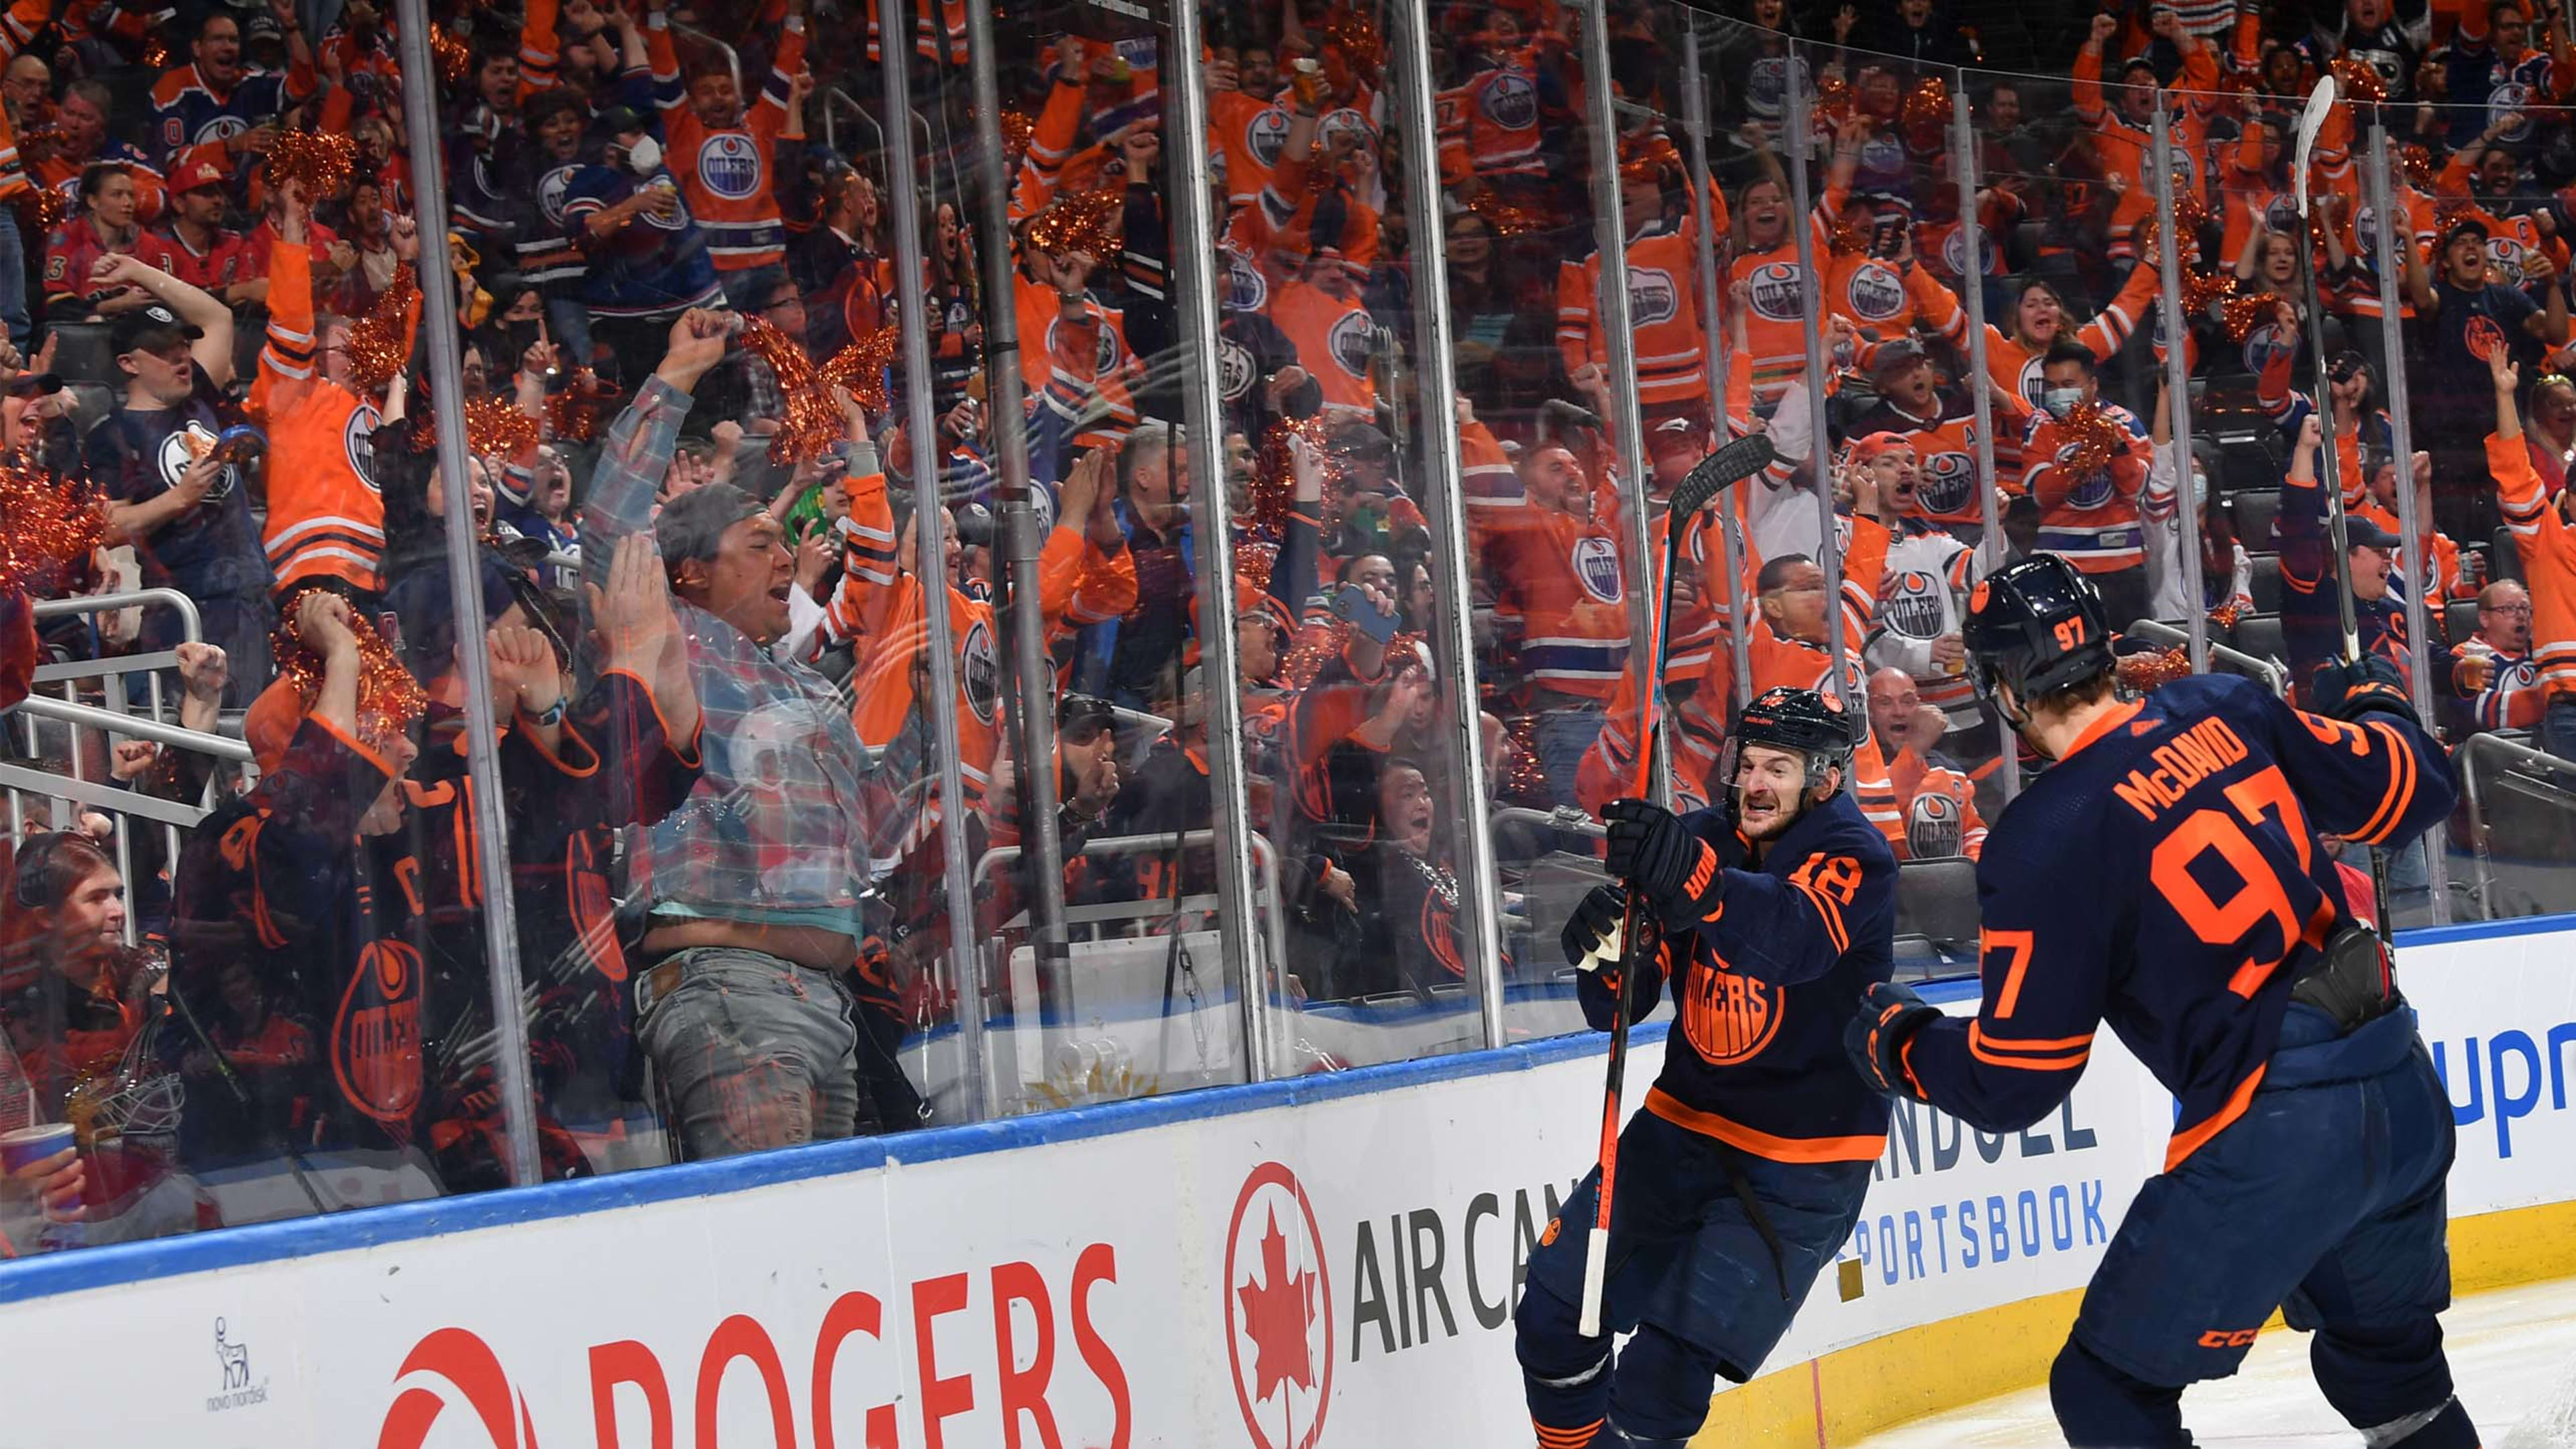 Oilers fans next to the glass as Hyman celebrates goal